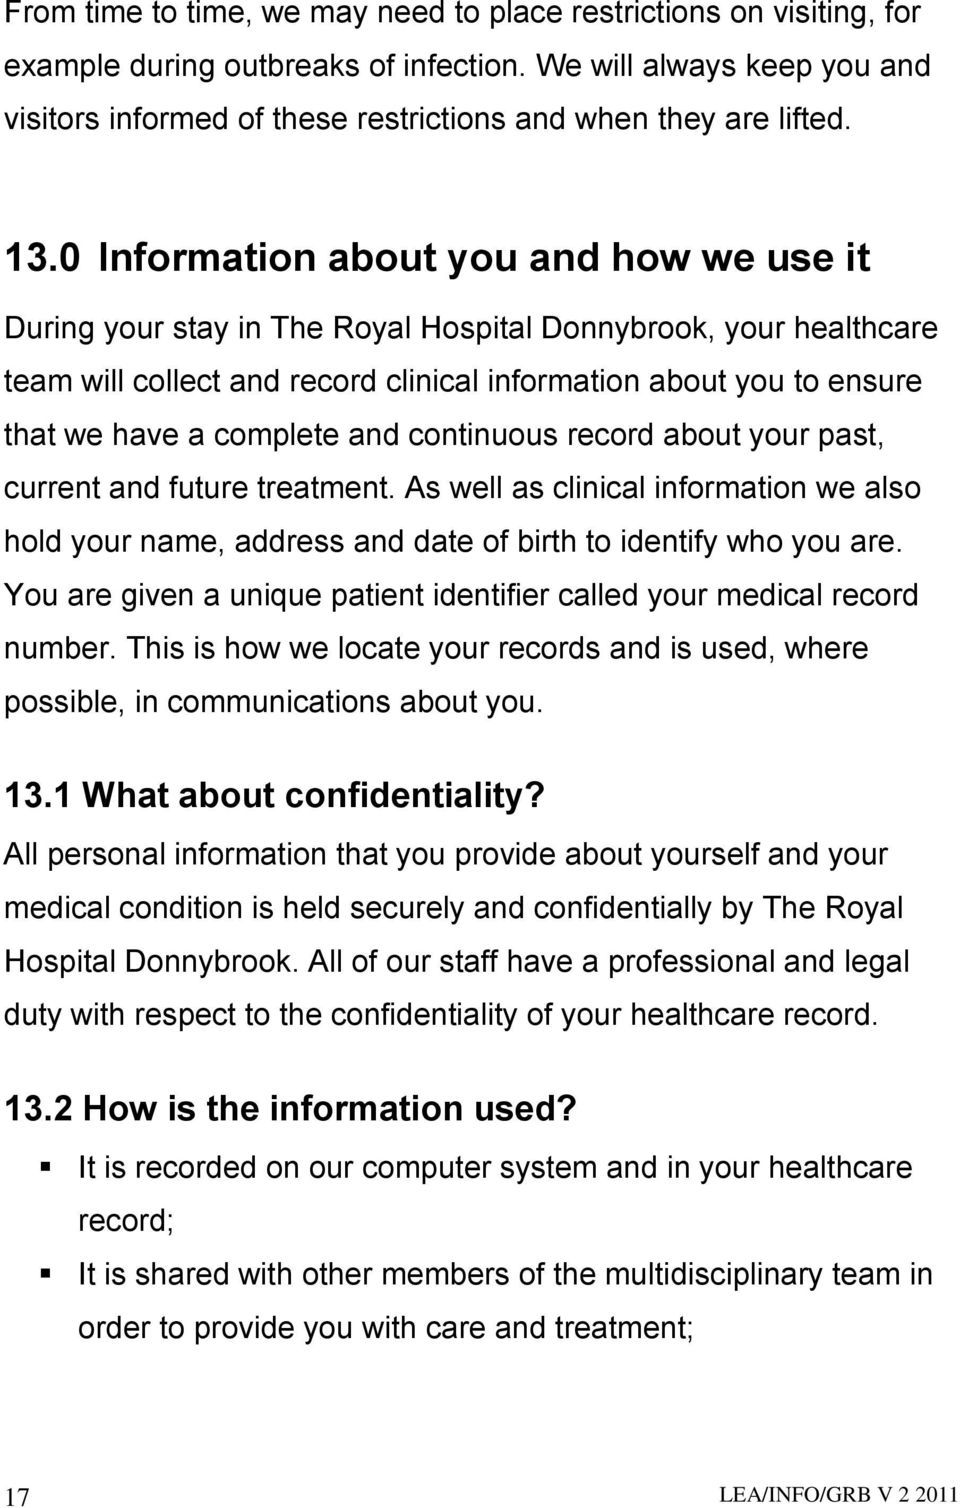 0 Information about you and how we use it During your stay in The Royal Hospital Donnybrook, your healthcare team will collect and record clinical information about you to ensure that we have a